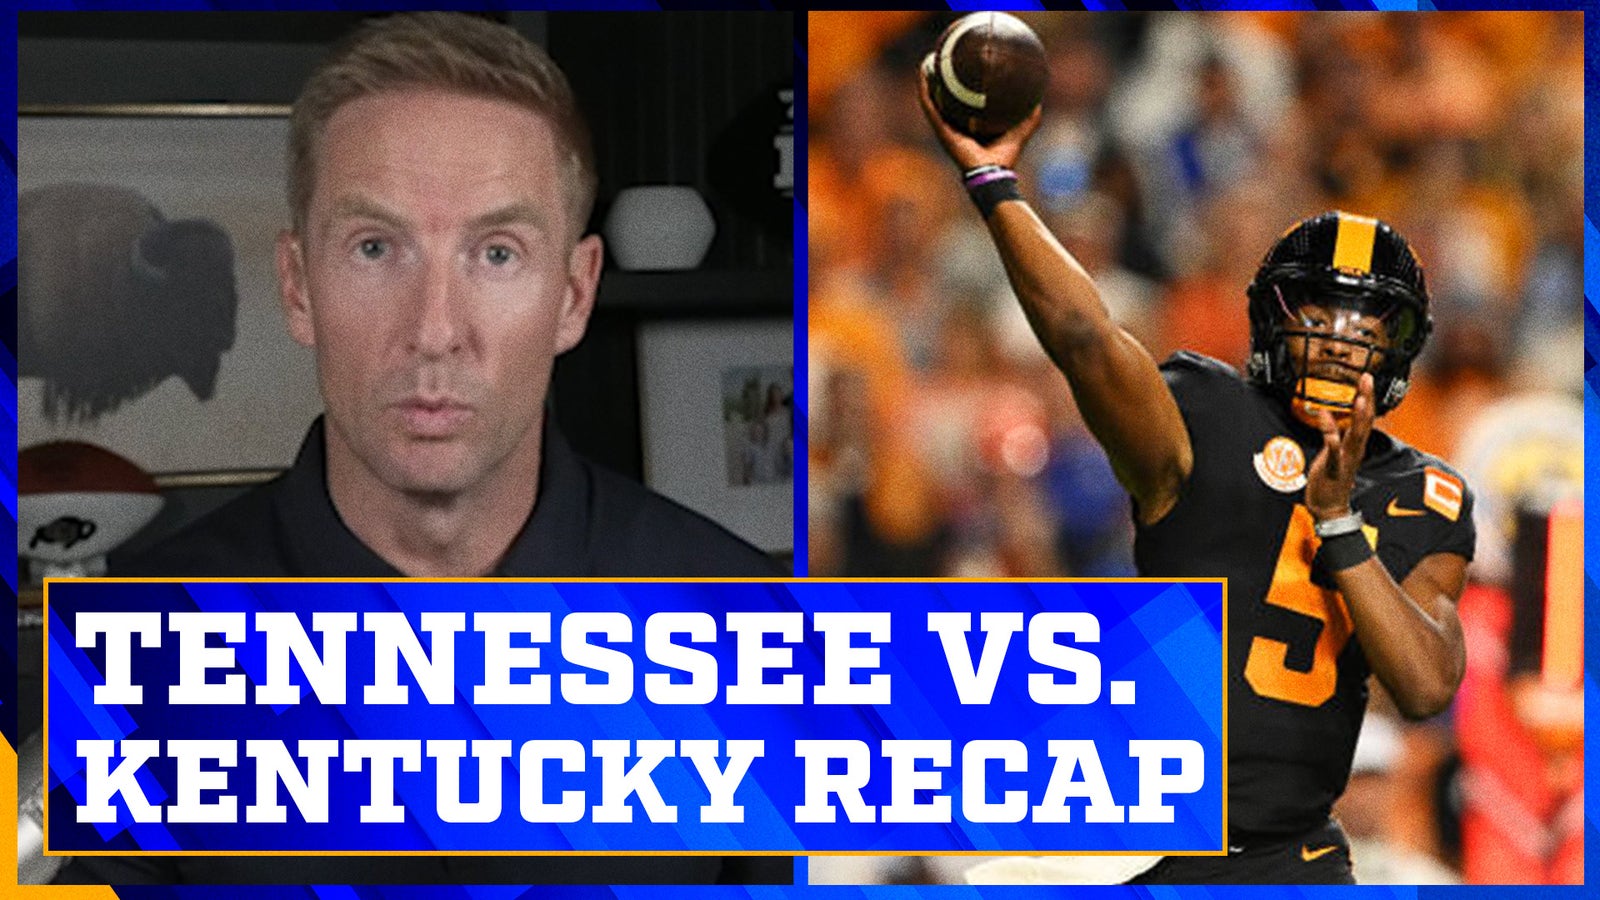 Tennessee dominates Kentucky: Are the Volunteers serious contenders for the CFP?